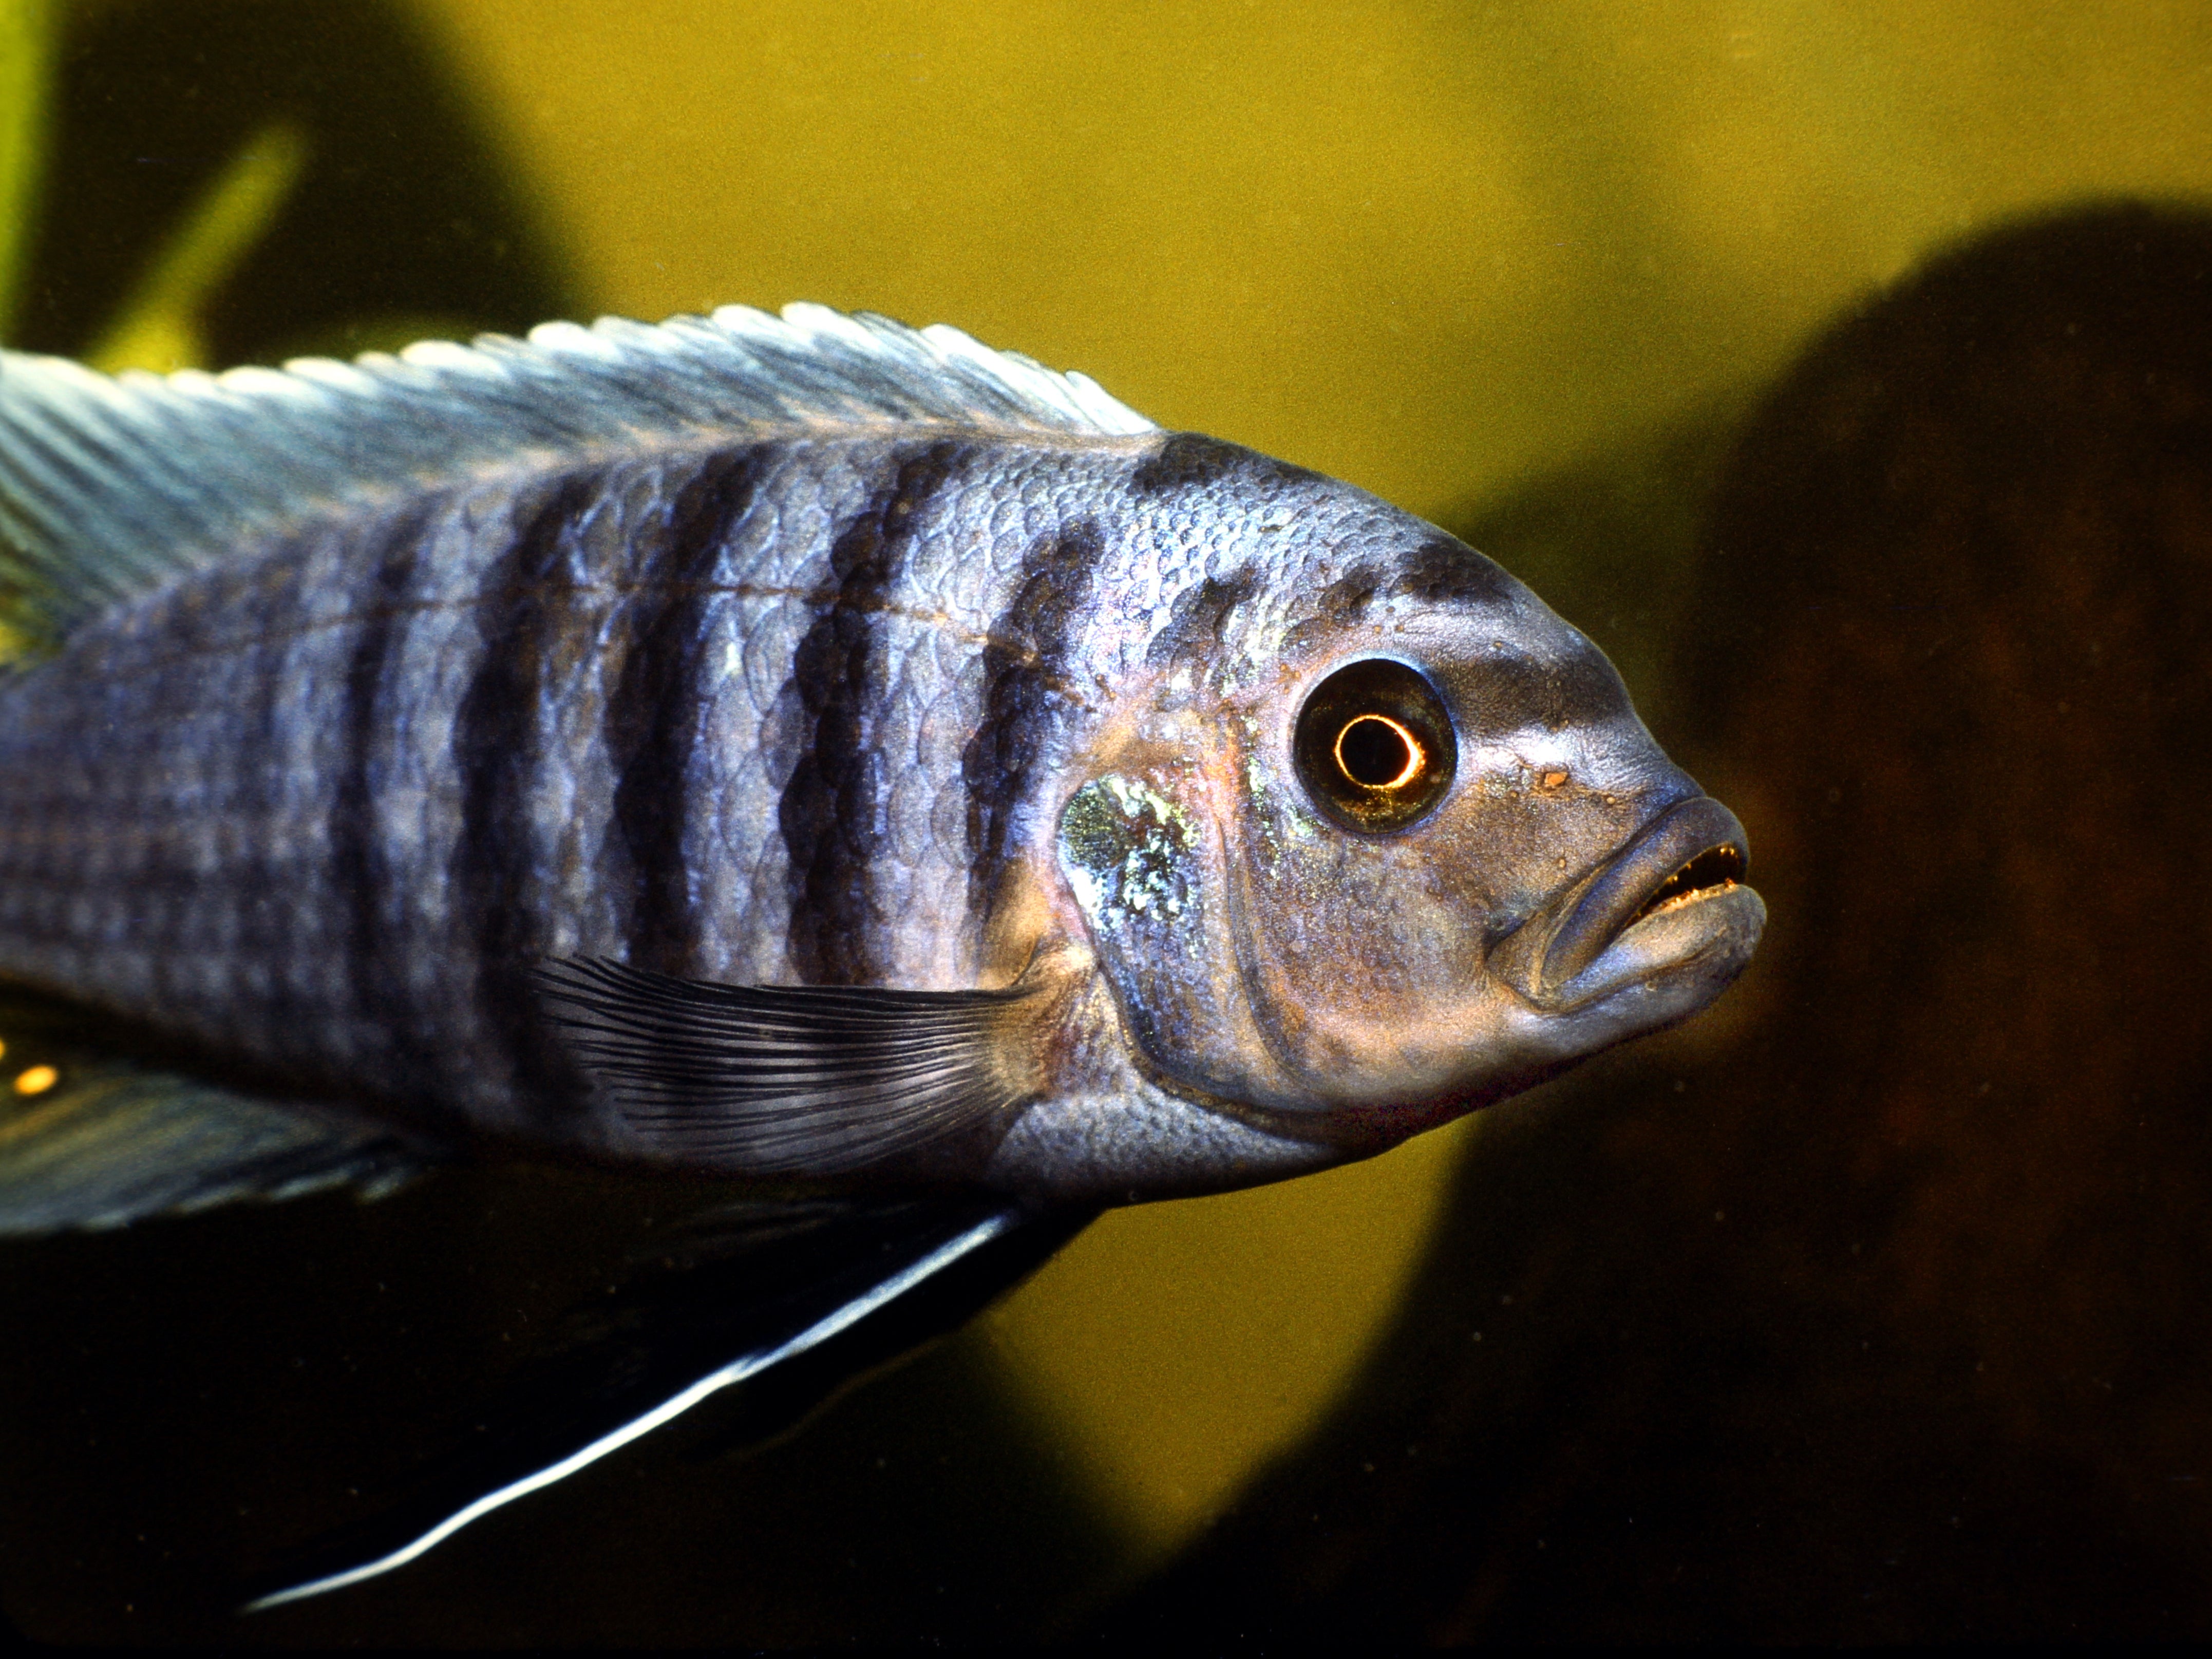 Zebra mbuna fish, pictured, were less able than stingrays when it came to mathematics